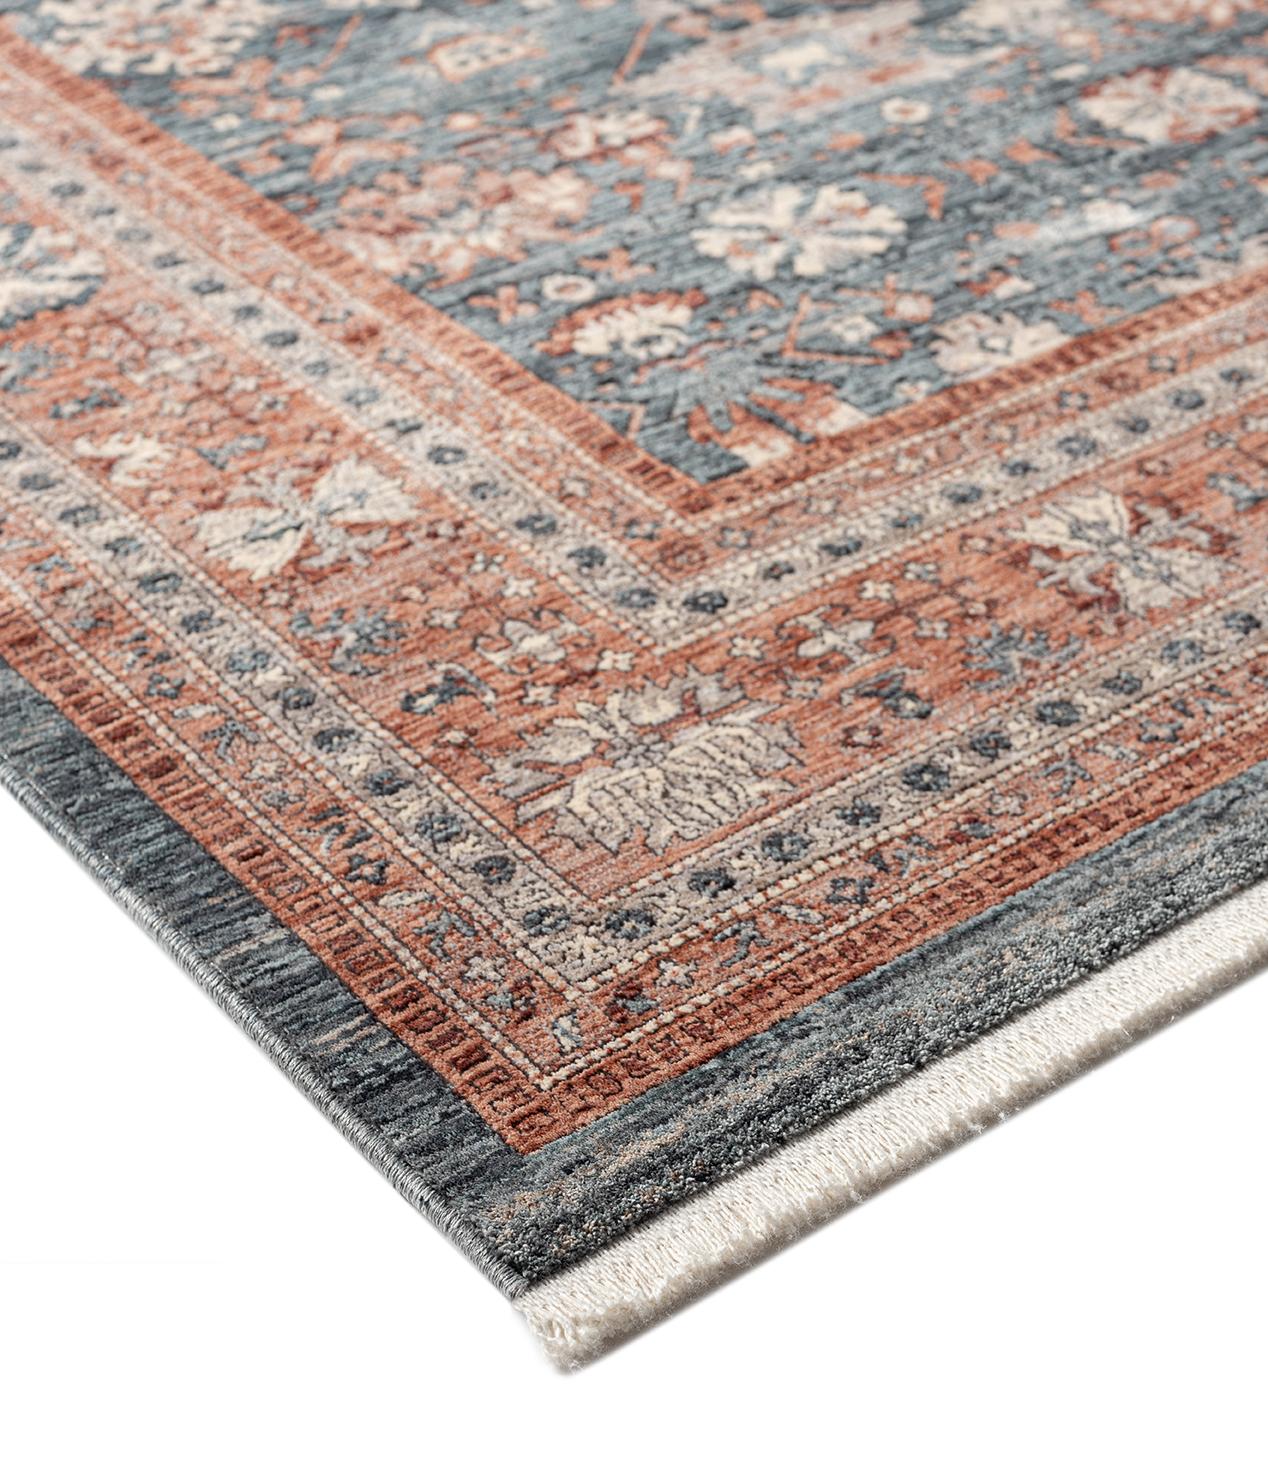 Bridging the gap between traditional and modern, the Transitional collection features rugs that exemplify versatility. The opulent pattern in this rug is derived from the rich tradition of Turkish embroidered textiles. Meticulously detailed and